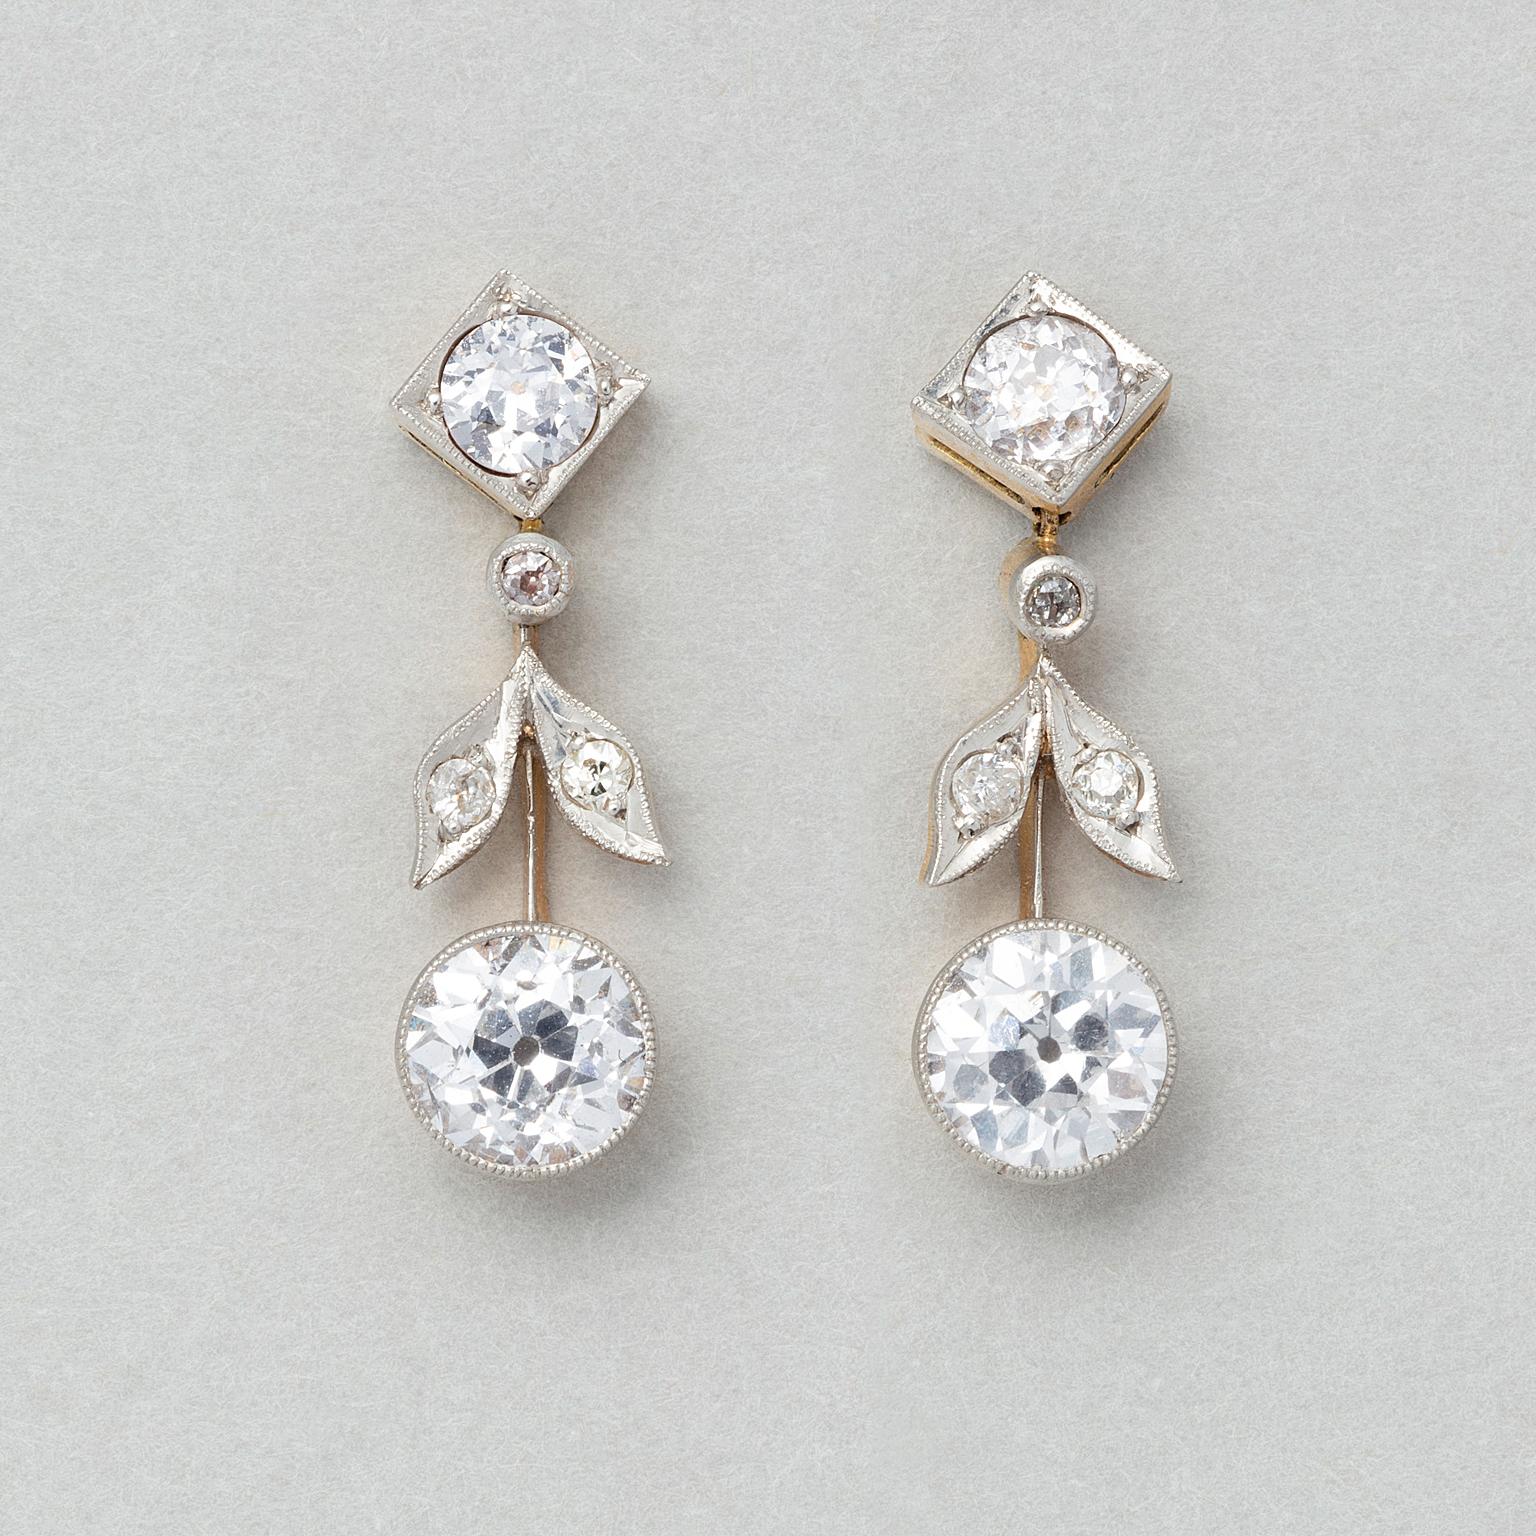 A pair of Edwardian platinum and yellow gold earrings on the ear a diamond shape mille griffe set with an old cut diamond (each app. 0.2 carat) with three small old cut diamonds, set in leaves and below that a larger old cut diamond (each app. 0.65